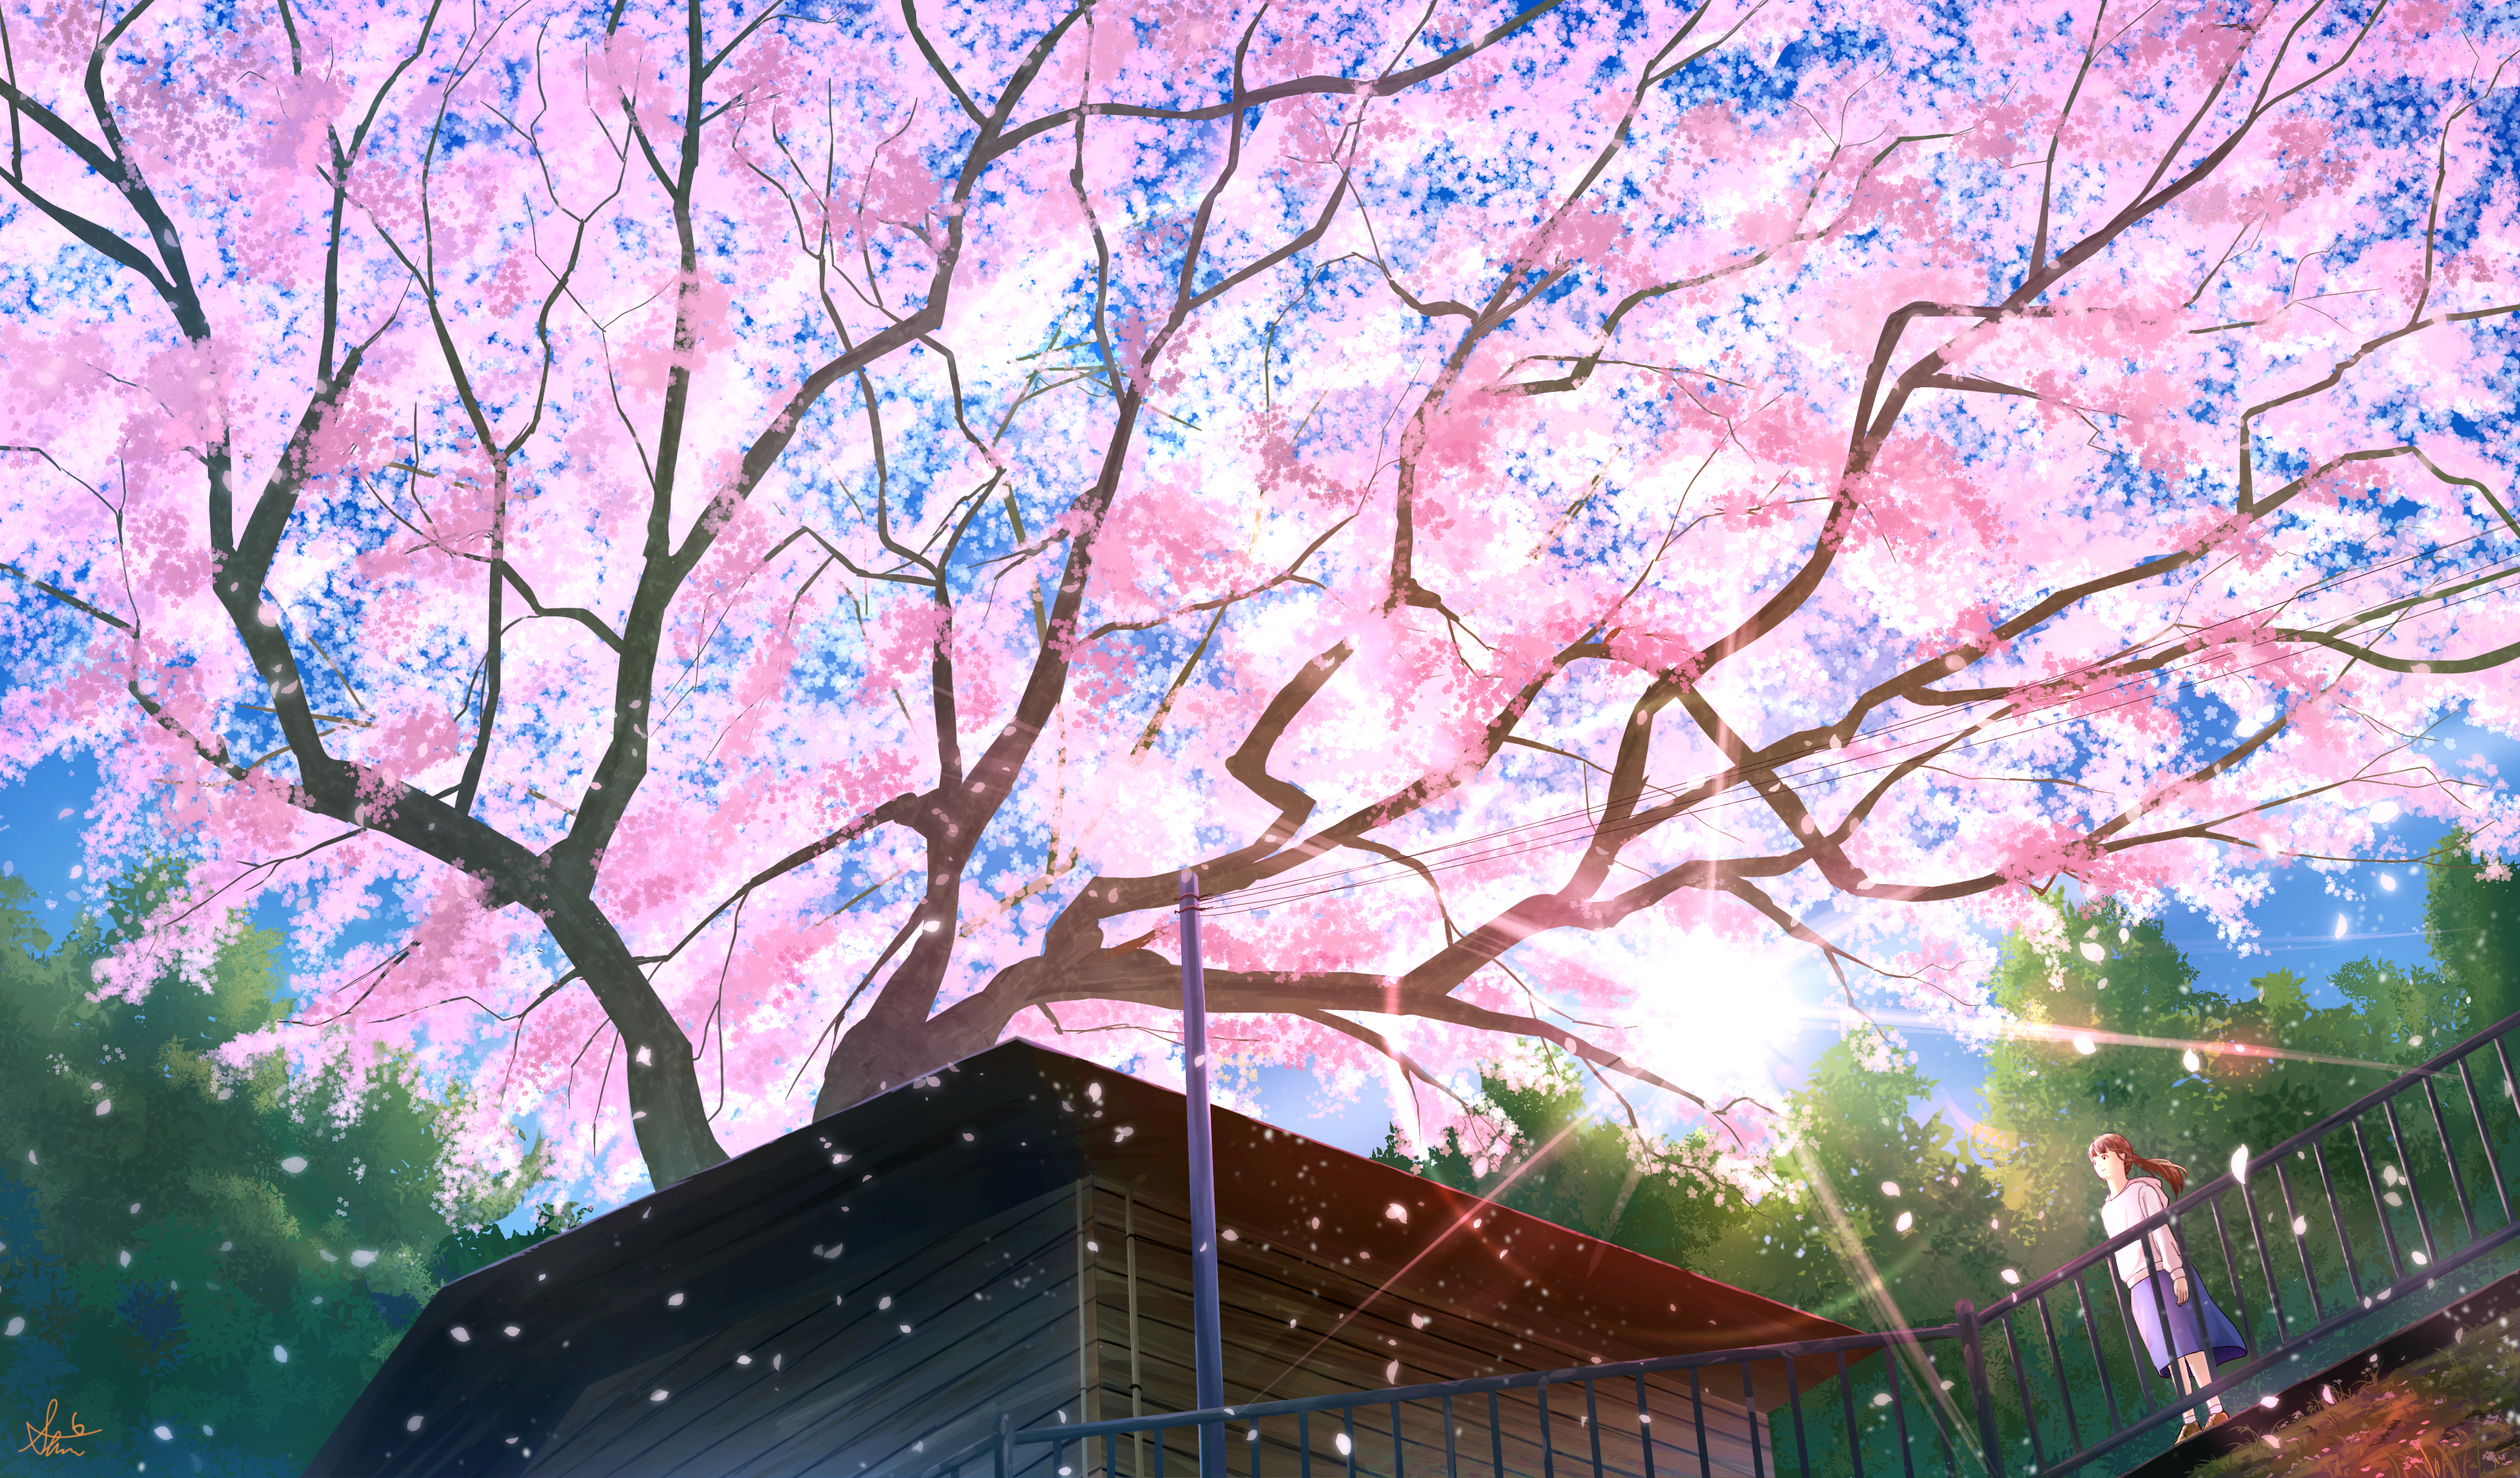 1,096 Anime Cherry Blossoms Images, Stock Photos, 3D objects, & Vectors |  Shutterstock